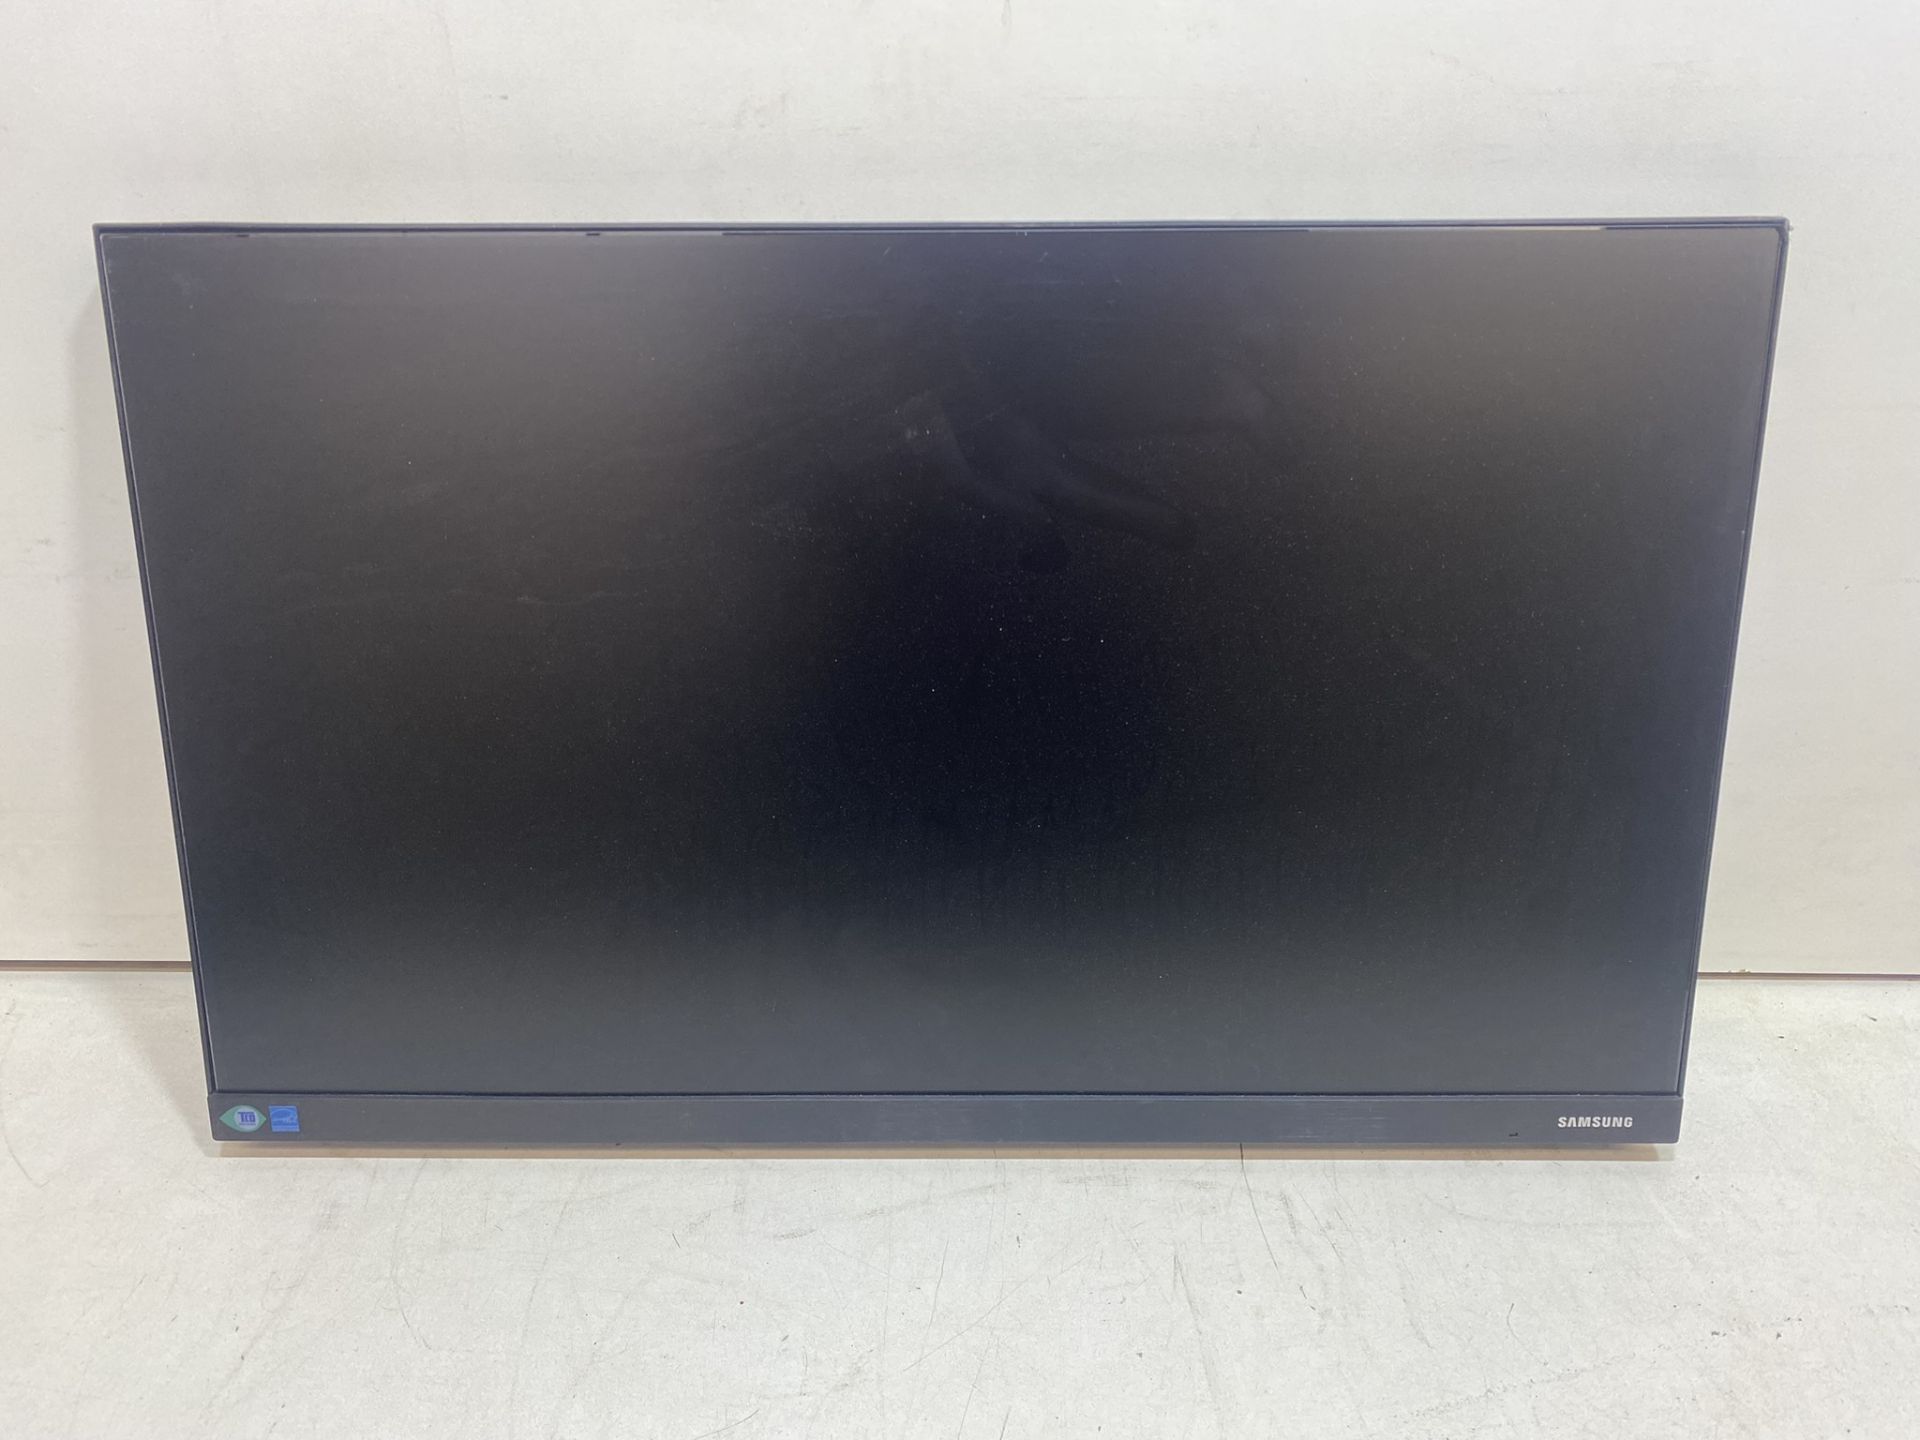 4 x Samsung F22T450FQU 22" HD LED LCD Monitor Without Stands - Image 12 of 15